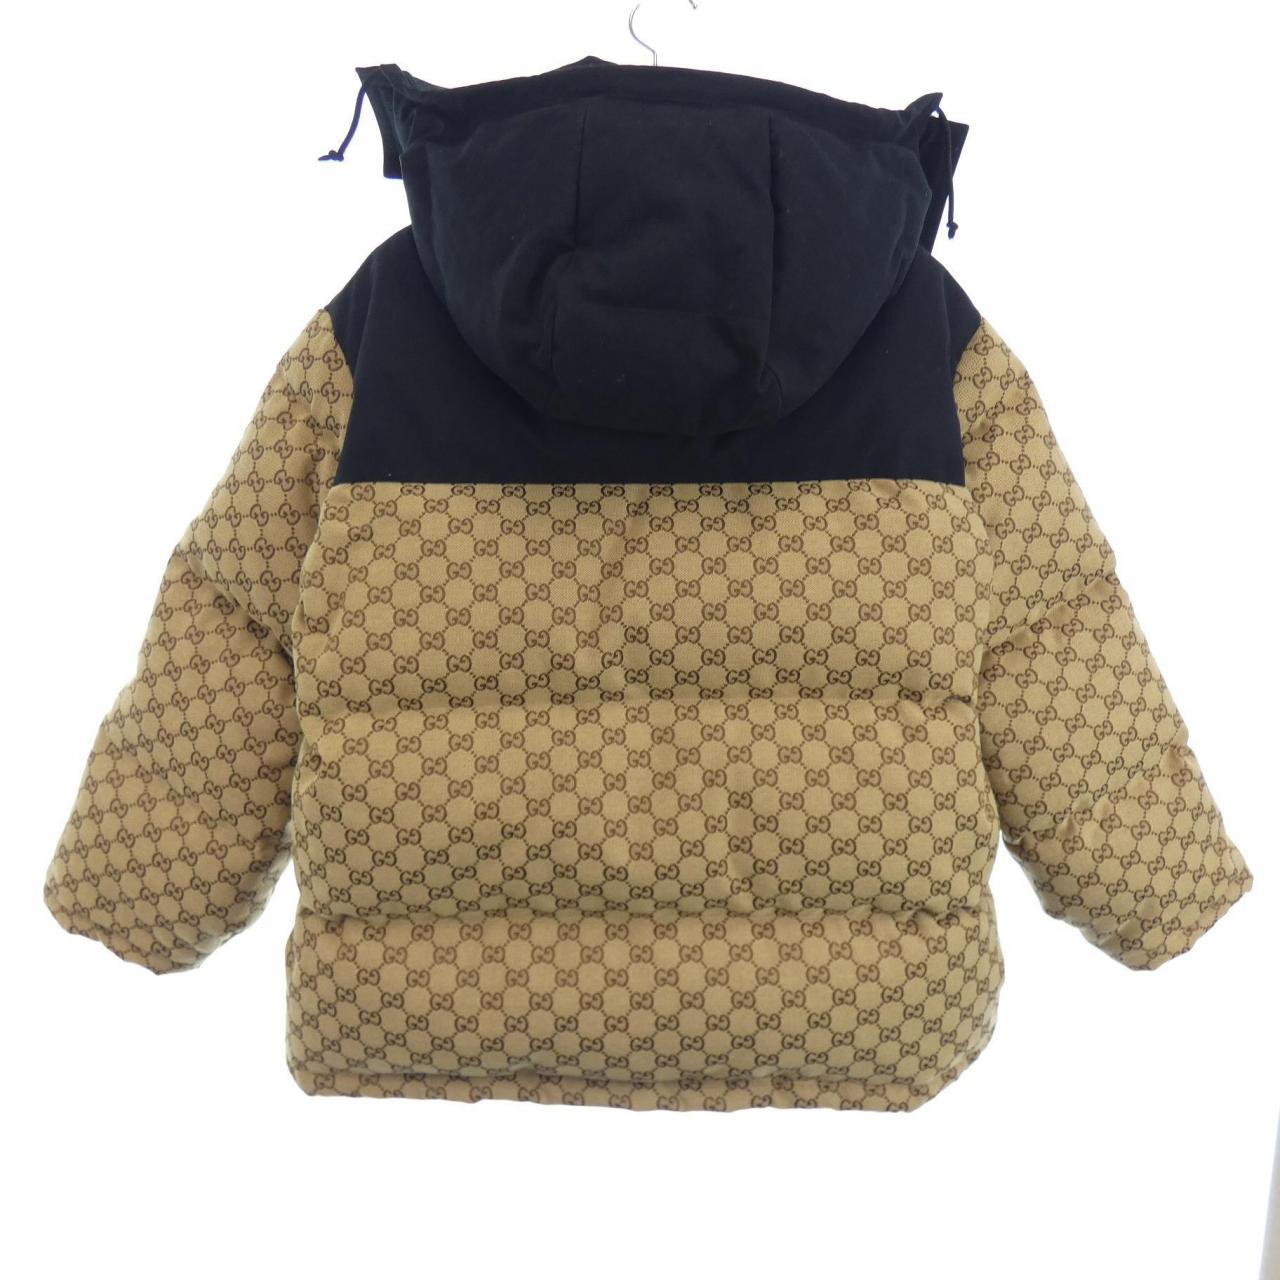 Down jacket with logo by Gucci | Tessabit